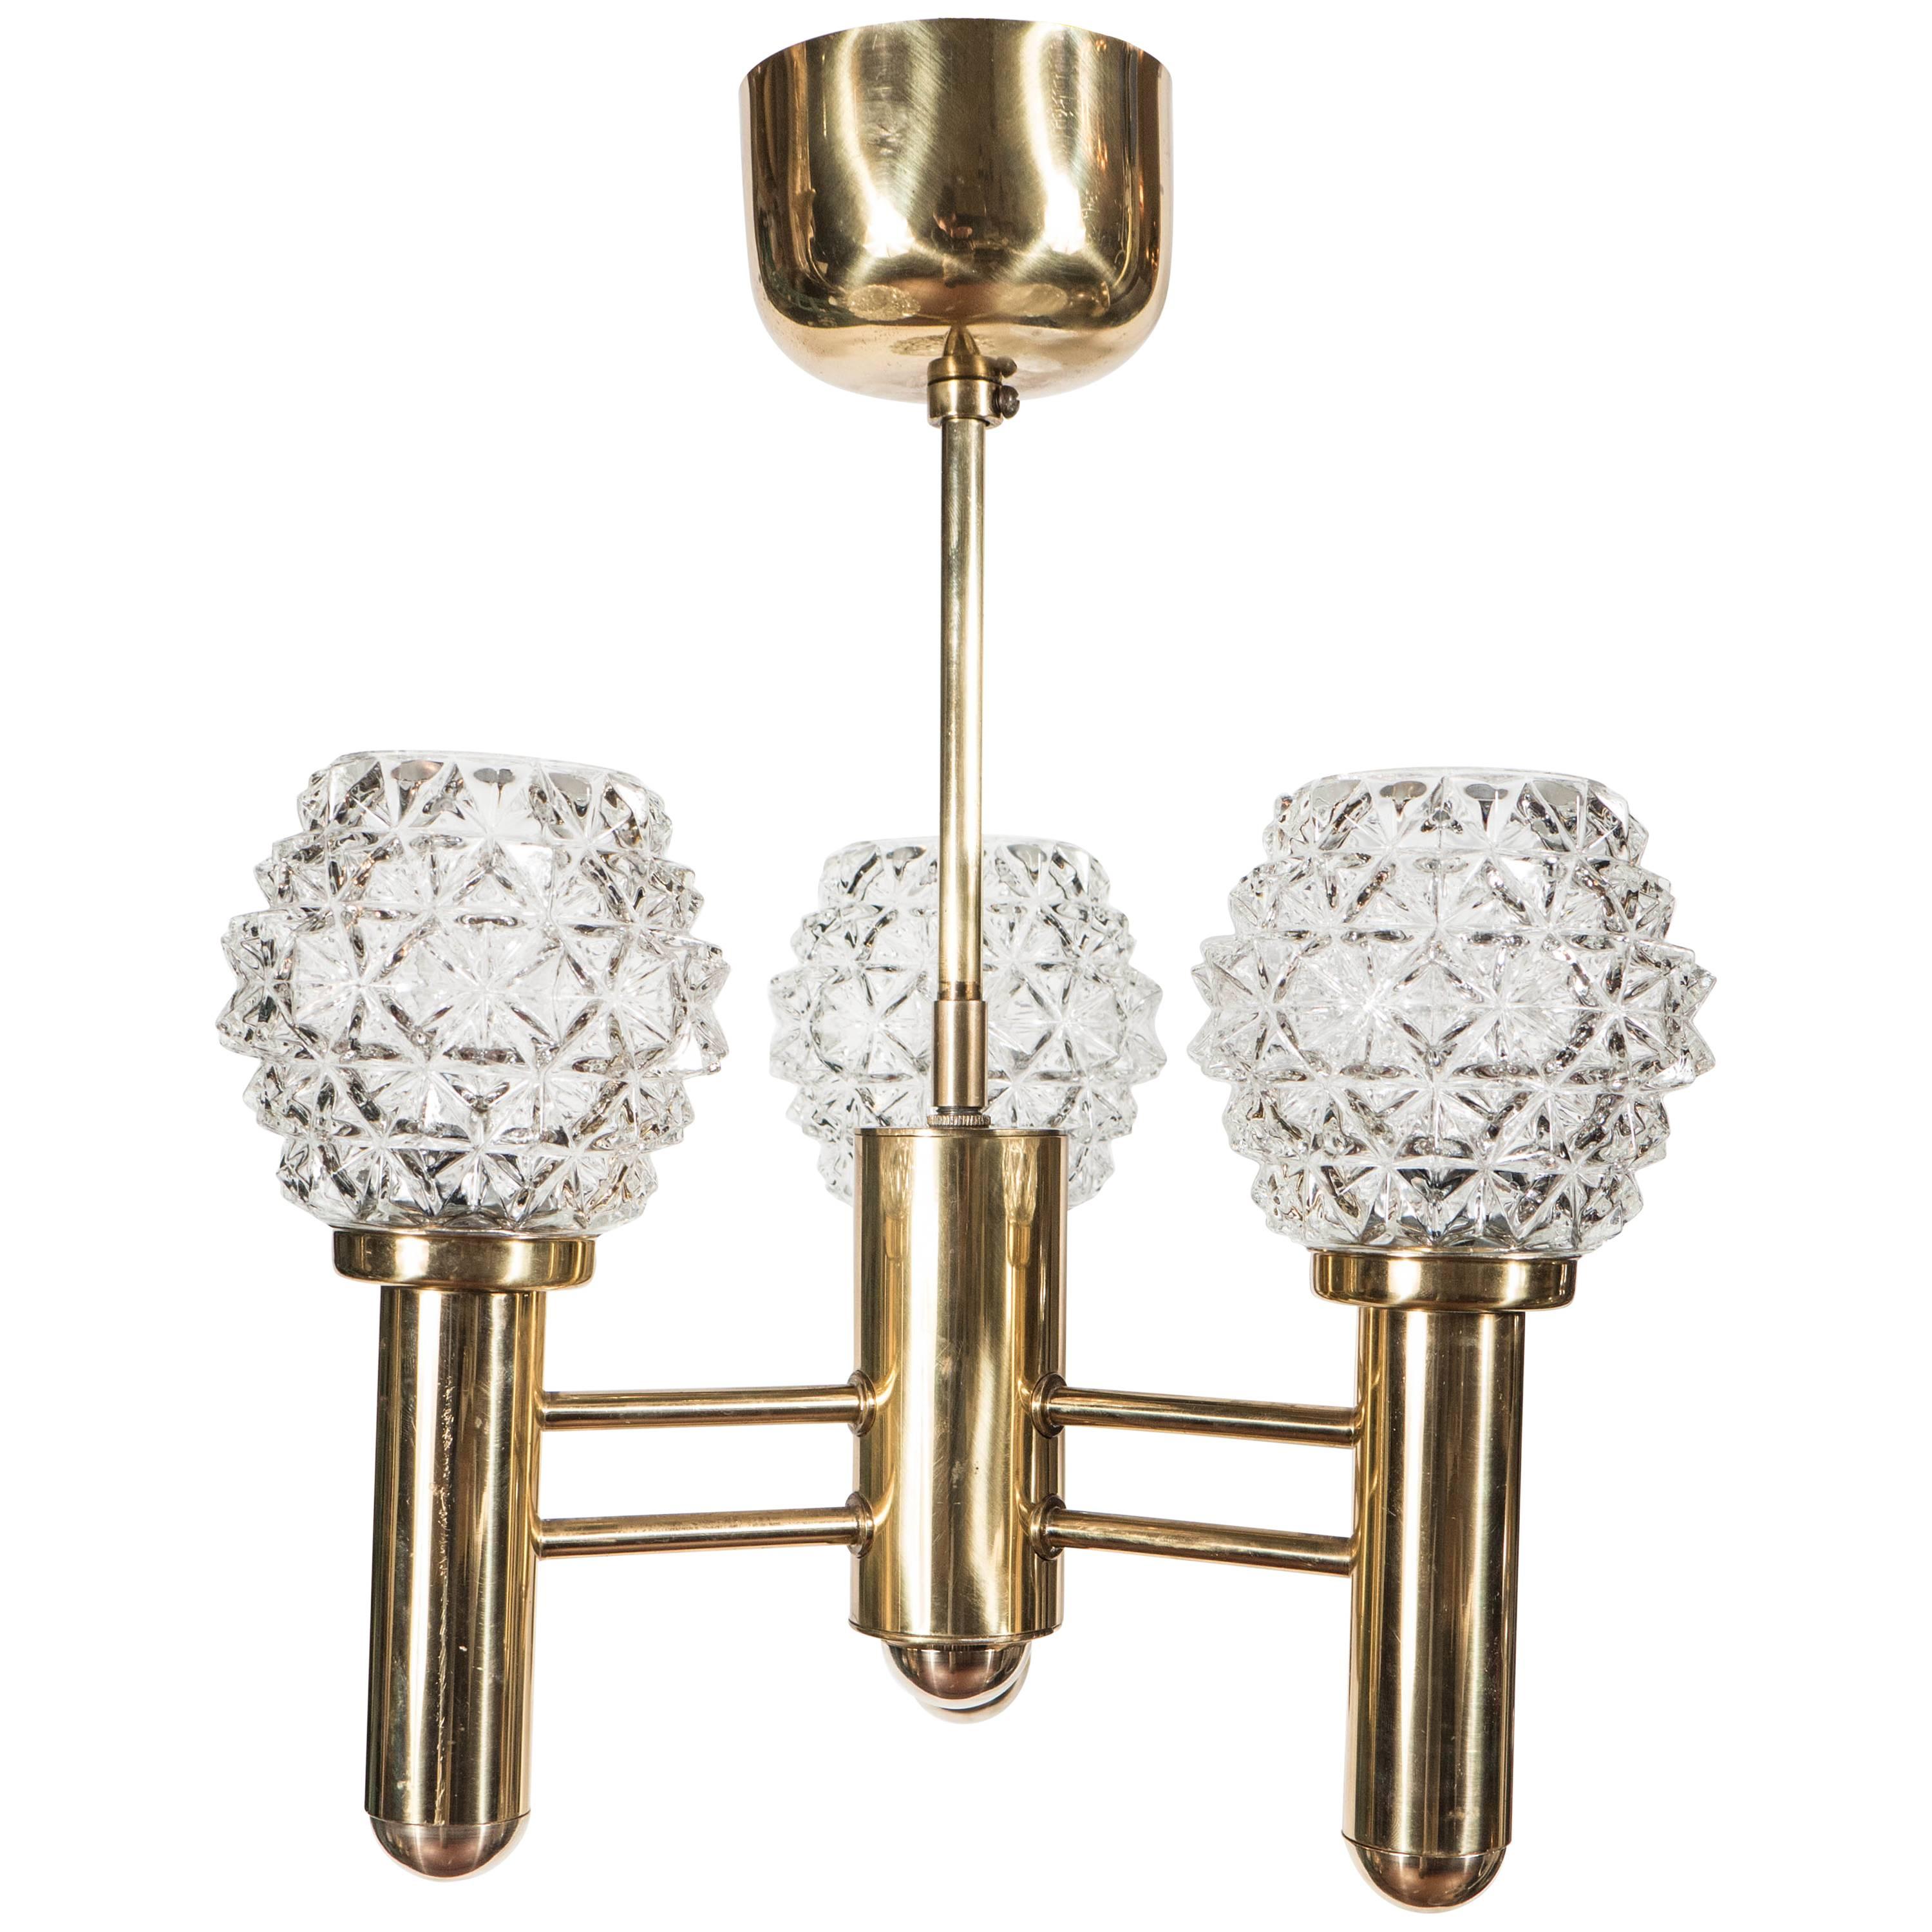 Sophisticated Three-Arm Chandelier in Brass with Crystal Shades by Richard Essig